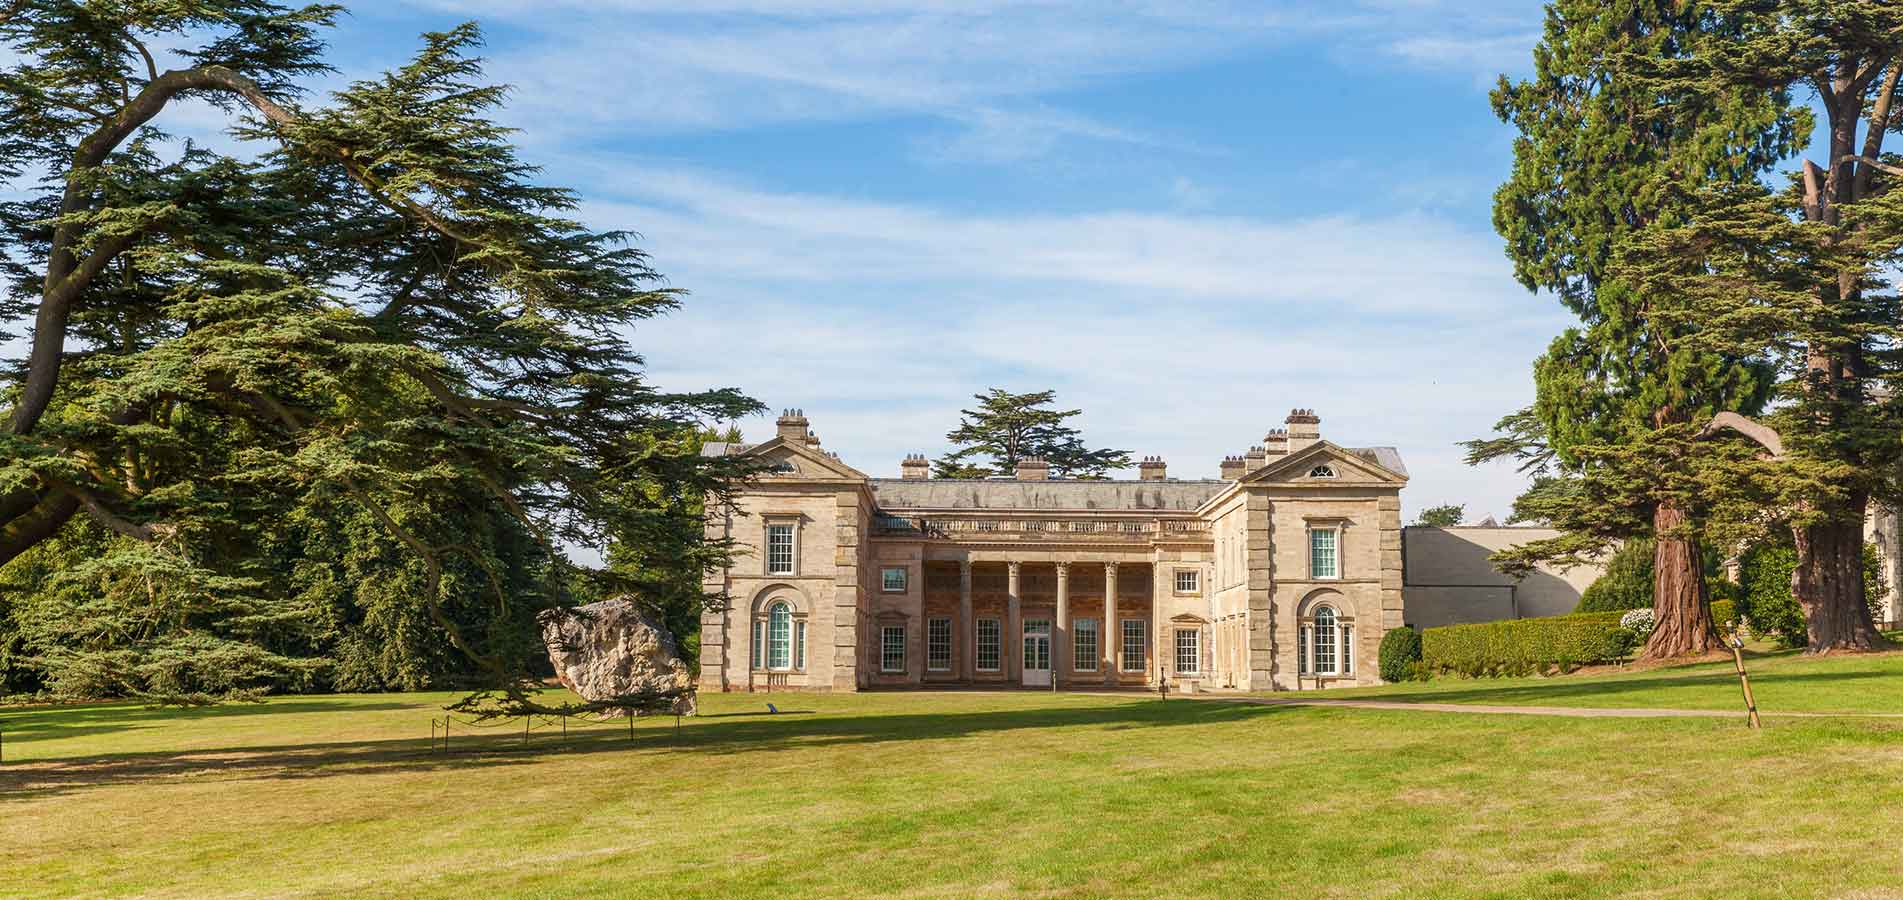 Compton-Verney-House-Exterior-John-Cleary-Photography